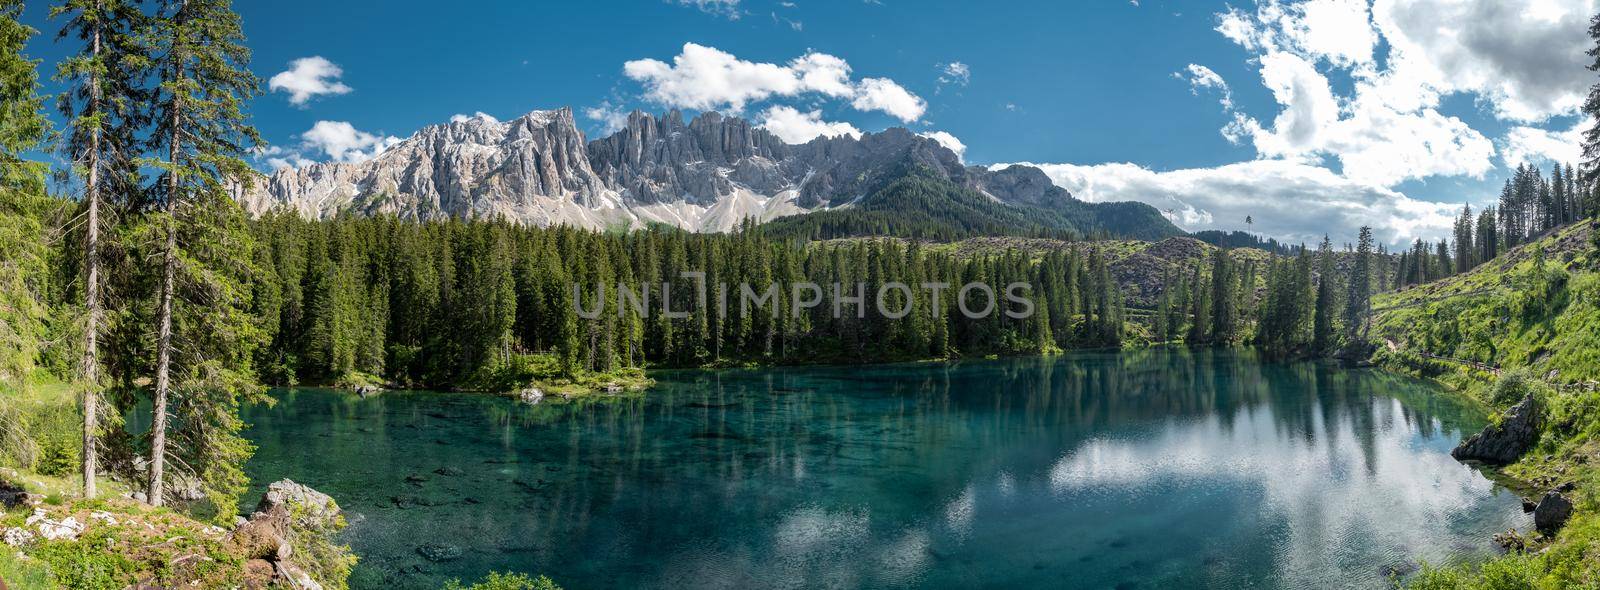 The majestic Lake of Lago di Carezza, beautiful green and turquoise colors in Dolomites mountains Italy,South tyrol, Italy. Landscape of Lake Carezza or Karersee and Dolomites in background Dolomites 